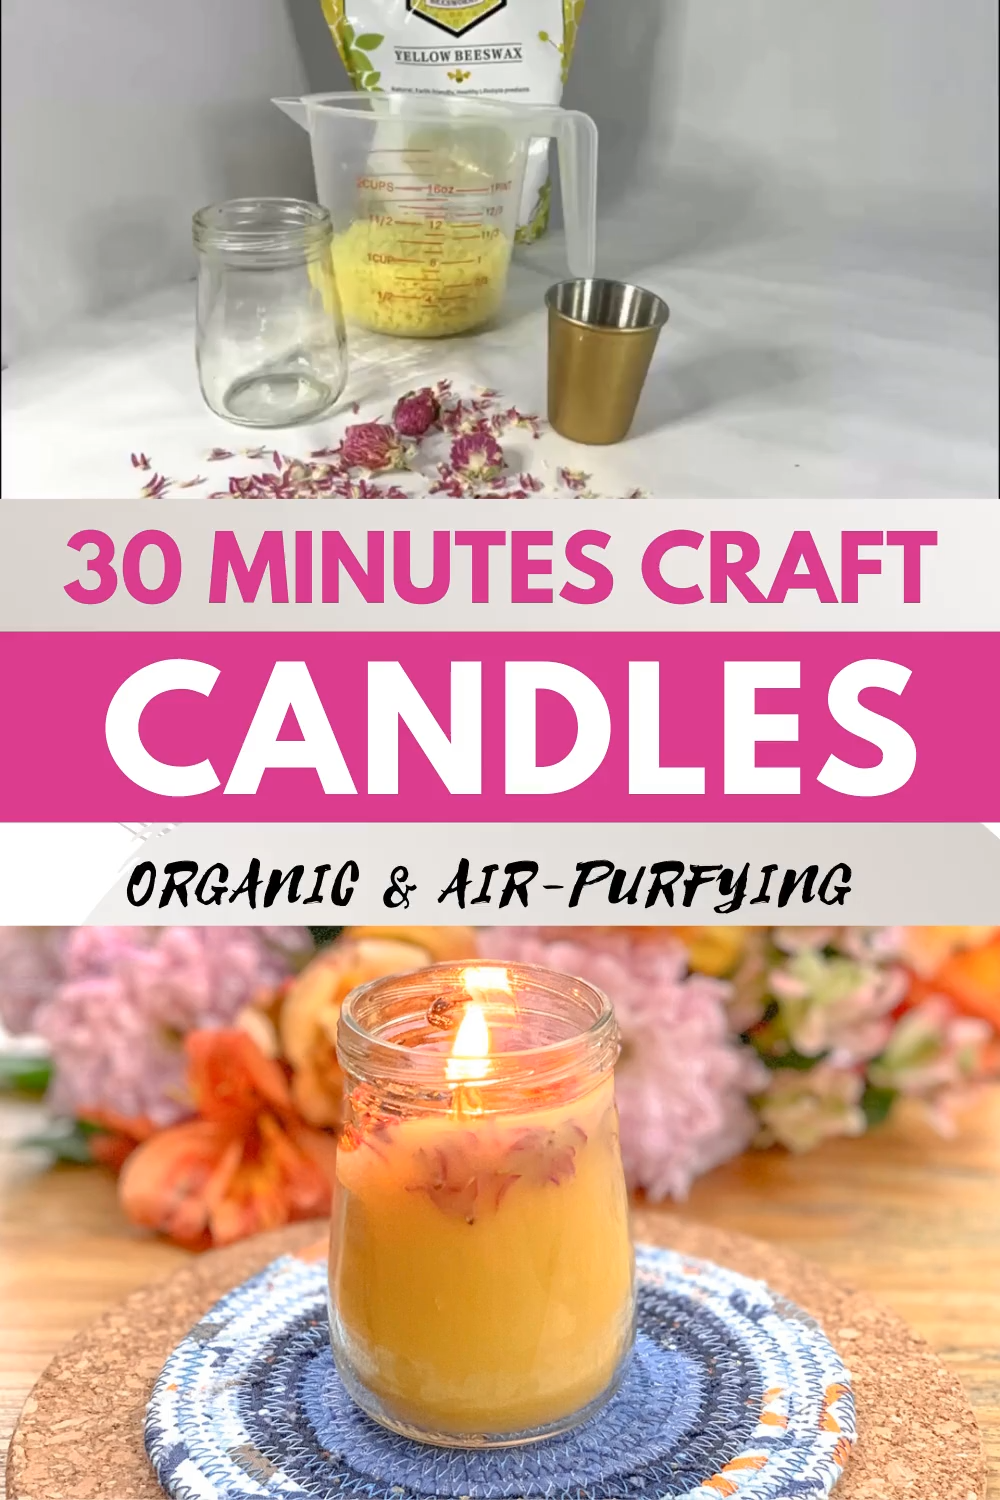 Do you want to make a natural beeswax candle? - Learn to create beautiful things - Do you want to make a natural beeswax candle? - Learn to create beautiful things -   19 diy Candles with herbs ideas